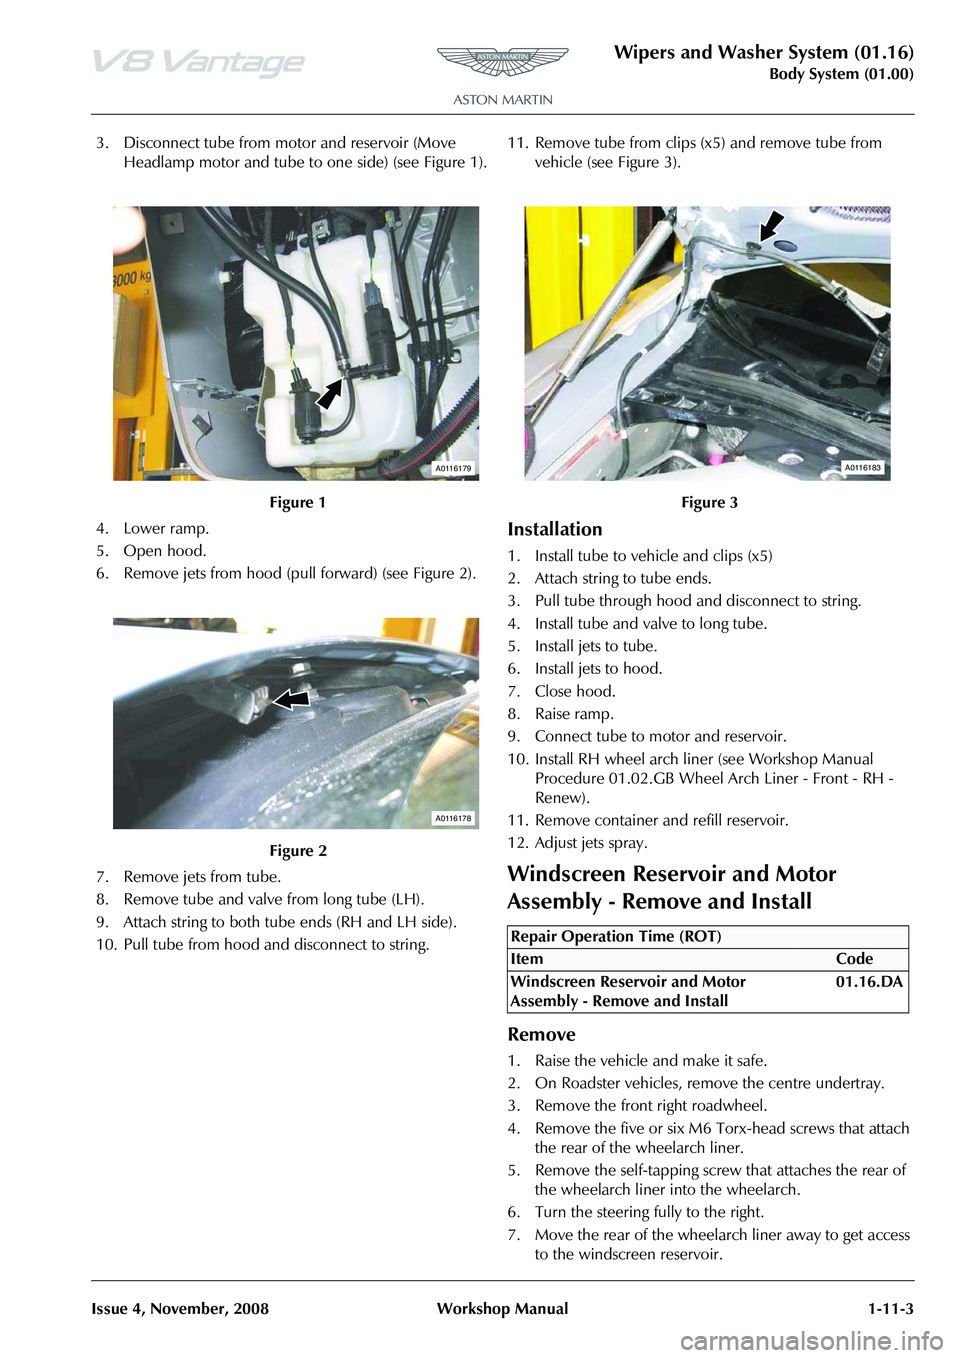 ASTON MARTIN V8 VANTAGE 2010  Workshop Manual Wipers and Washer System (01.16)
Body System (01.00)
Issue 4, November, 2008 Workshop Manual 1-11-3
3. Disconnect tube from motor and reservoir (Move  Headlamp motor and tube to one side) (see Figure 